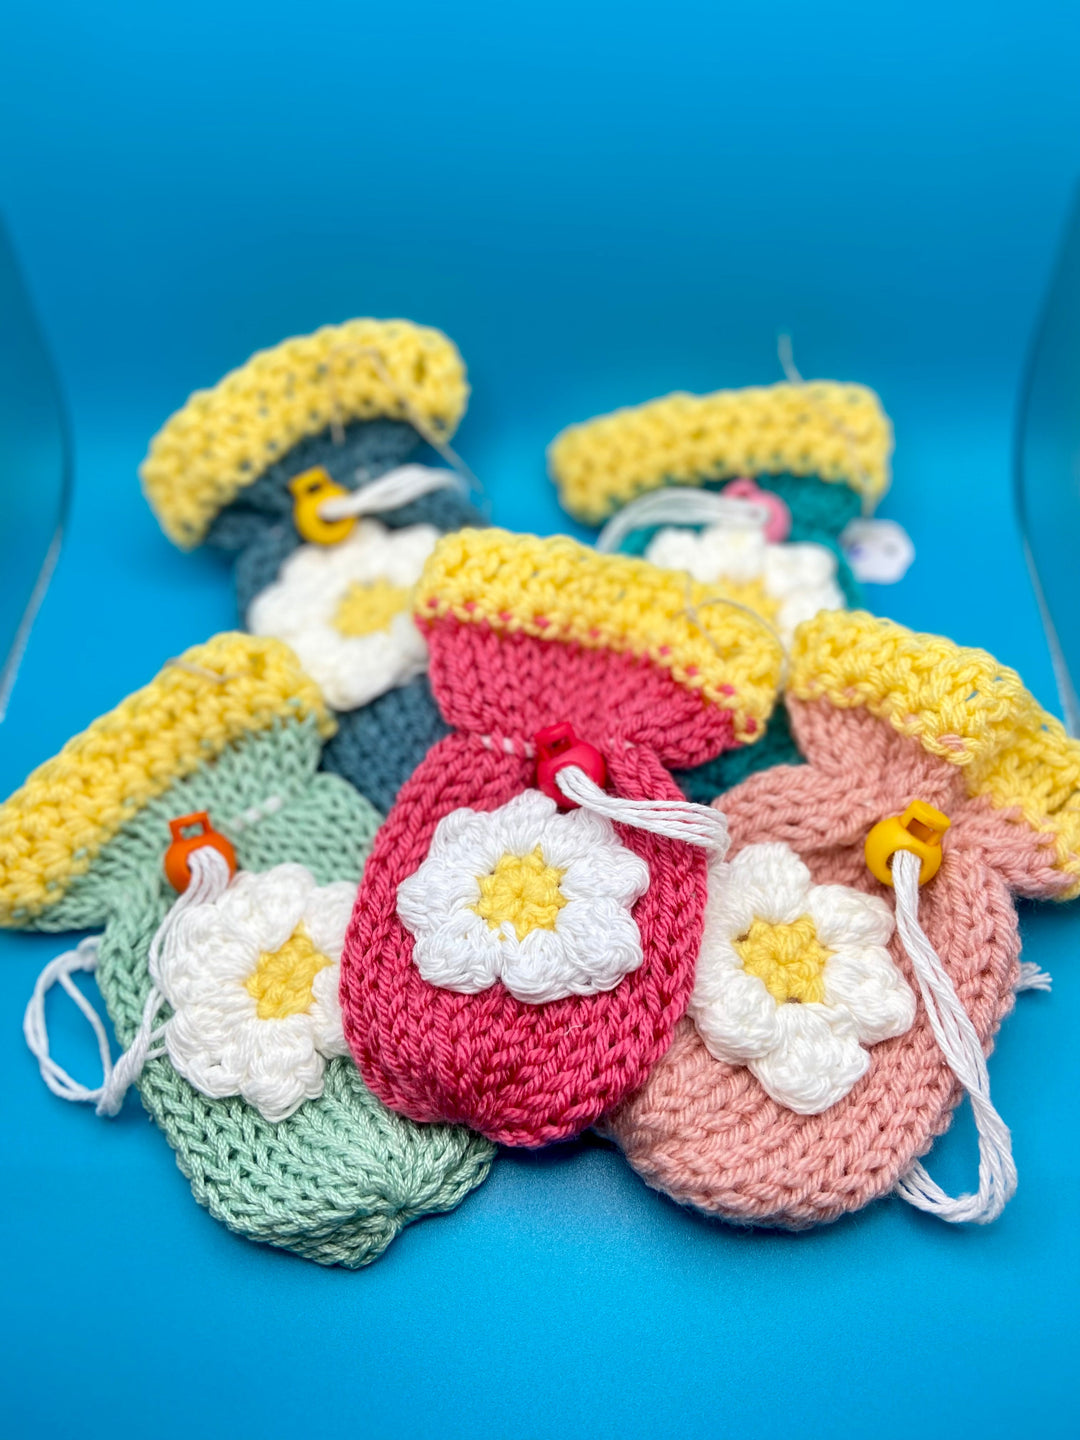 Hand-Made Daisy Earring Pouch